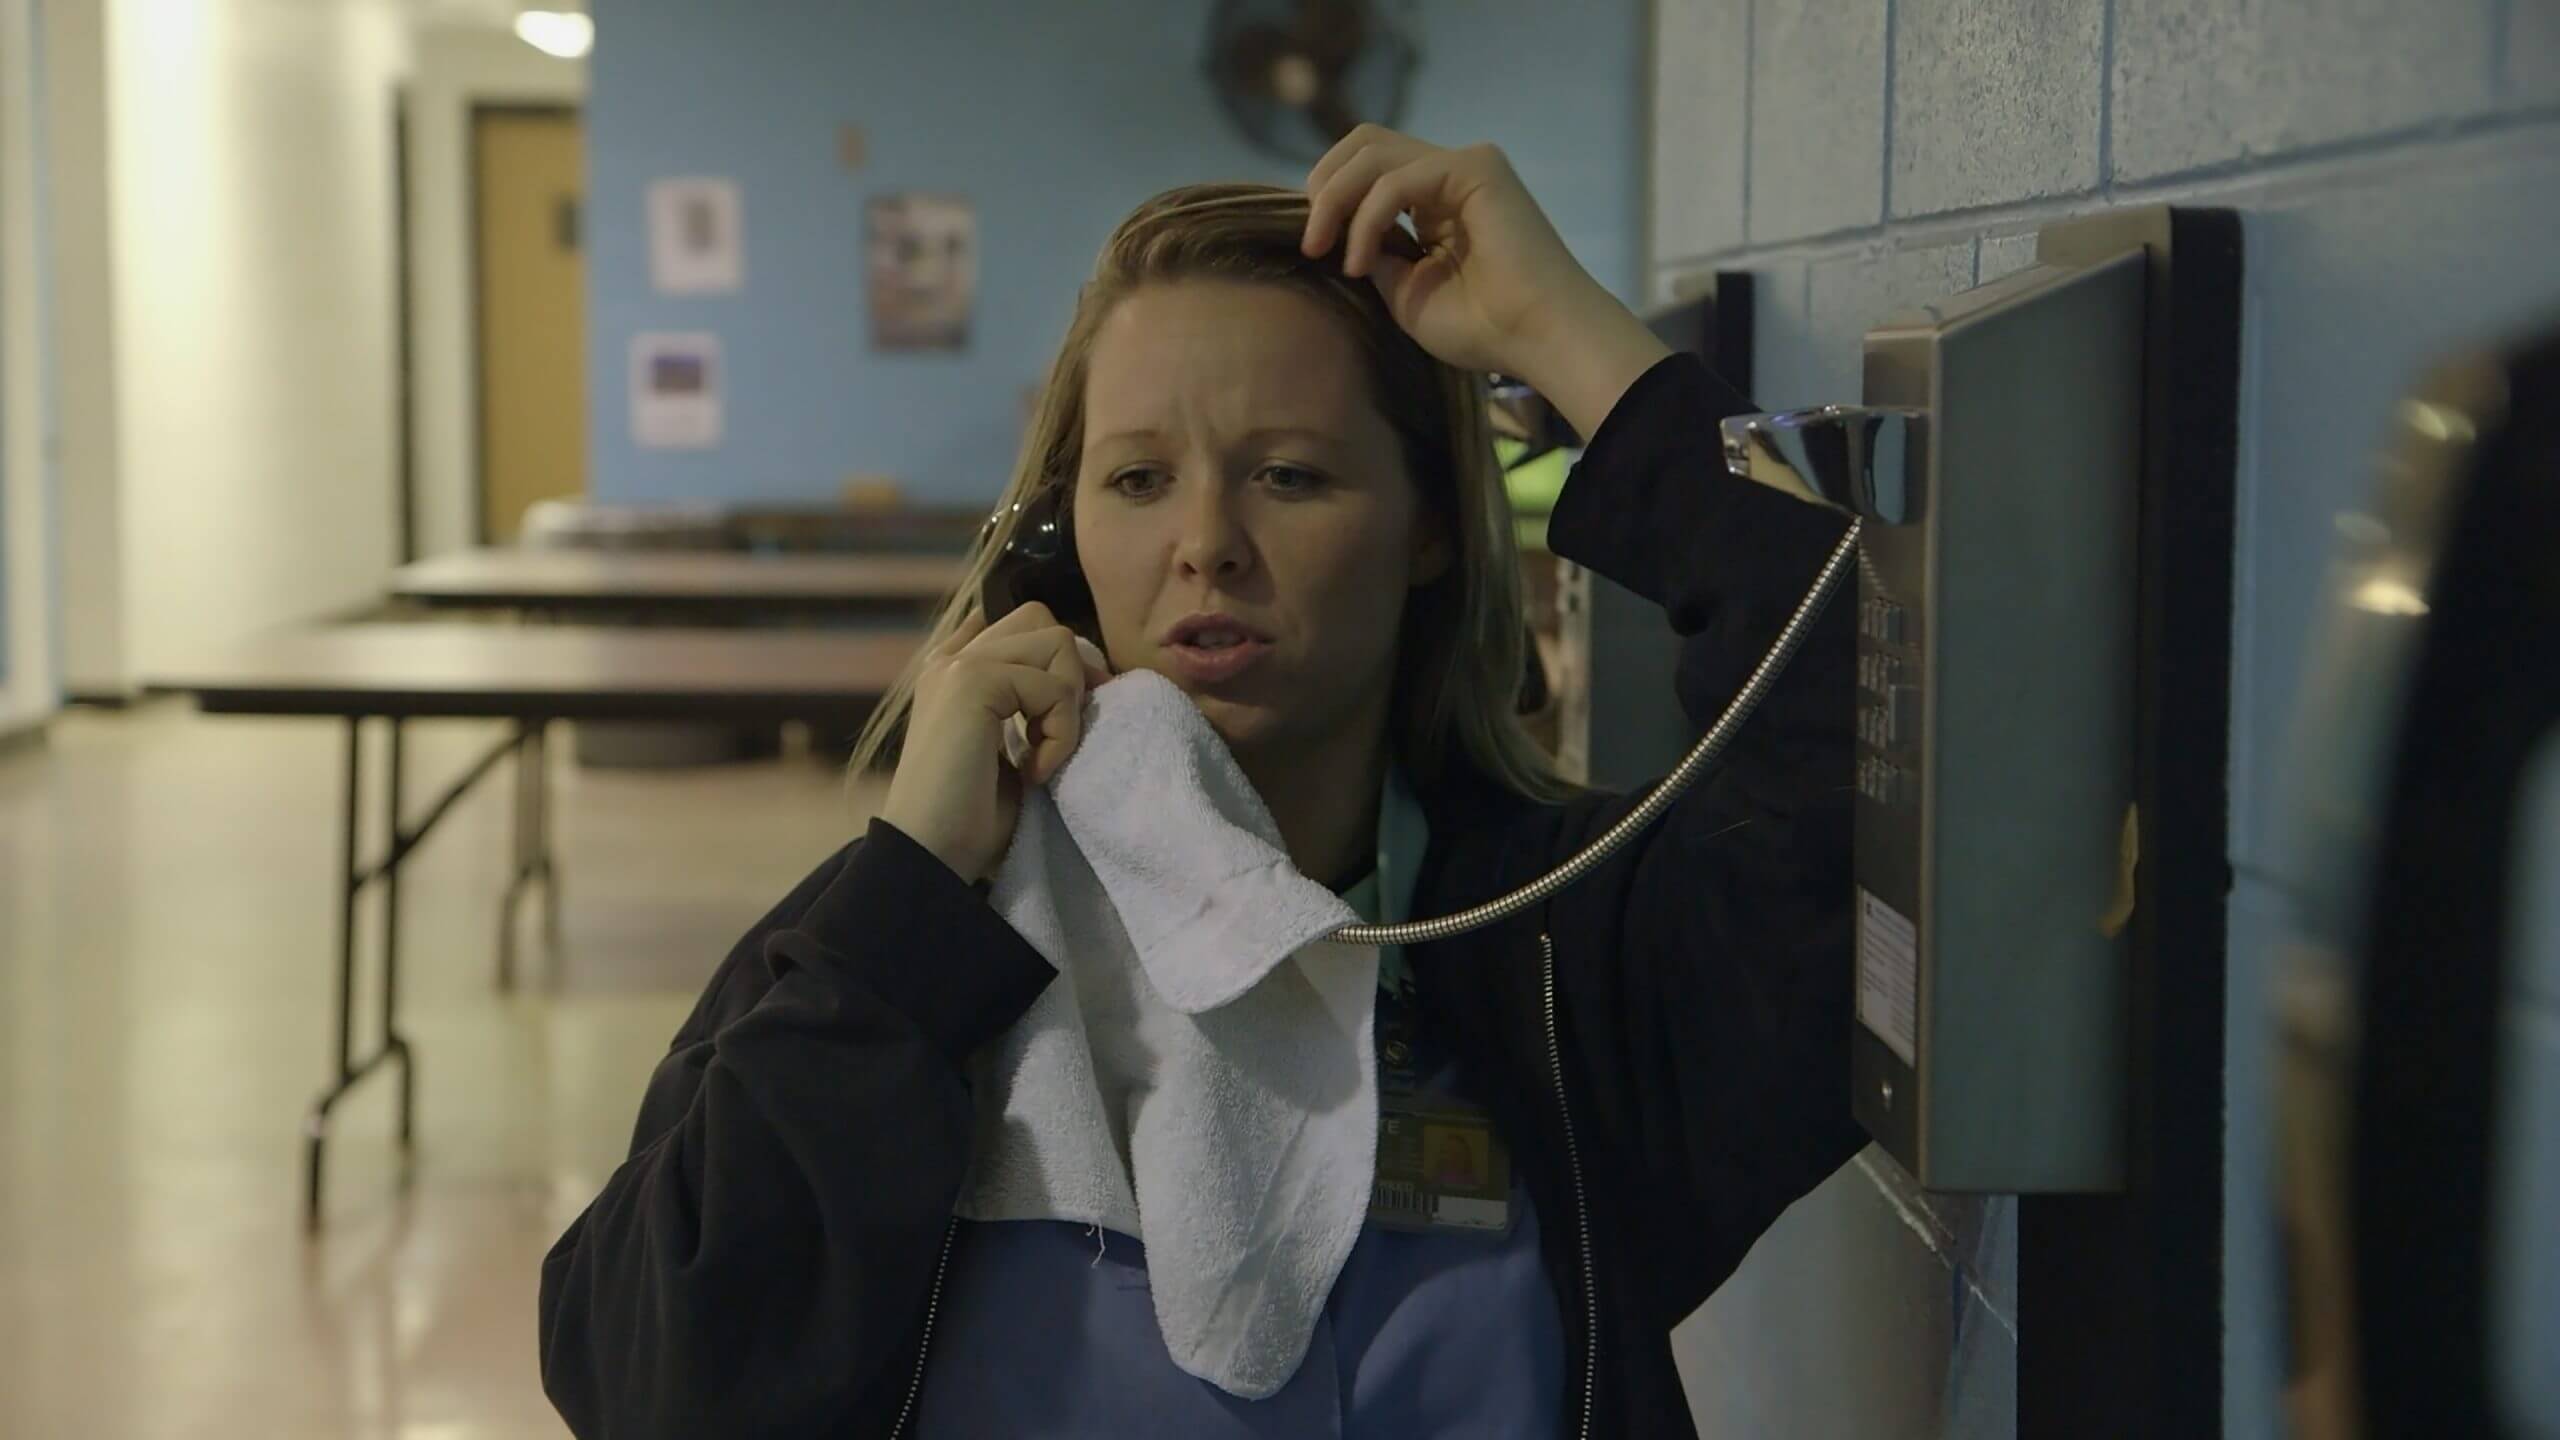 Still from Apart. Amanda is calling her son from prison.